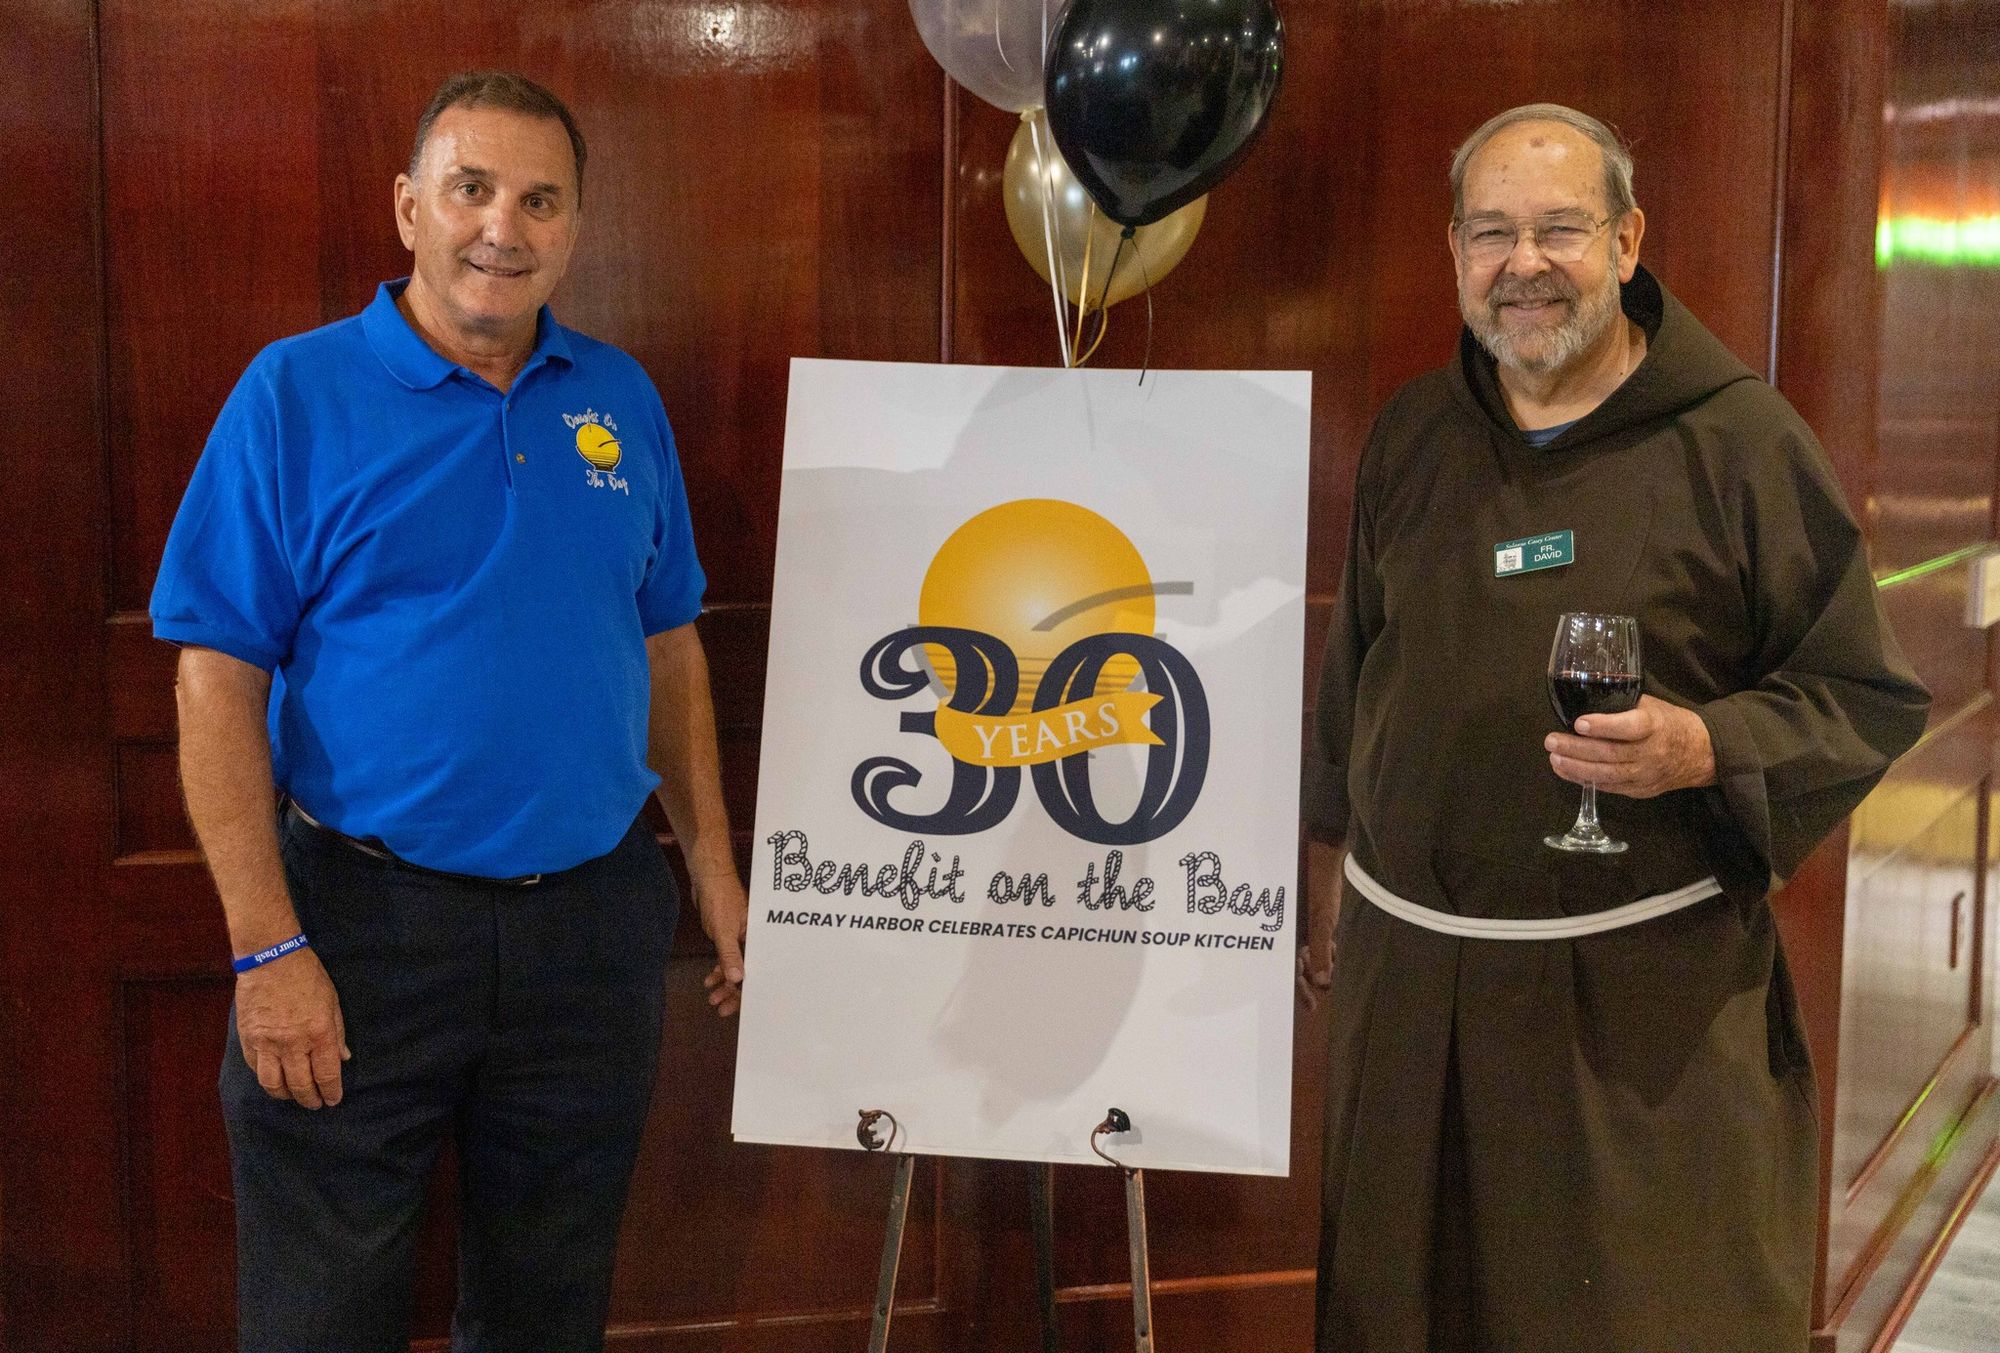 A color landscape photograph with a sign on an easel at center that reads "30 Years of Benefit on the Bay. Macray Harbor celebrates Capuchin Soup Kitchen." The sign is flanked by Shelving Inc. President Mike Schodowski at left and Fr. David Preuss, OFM Cap. at right.